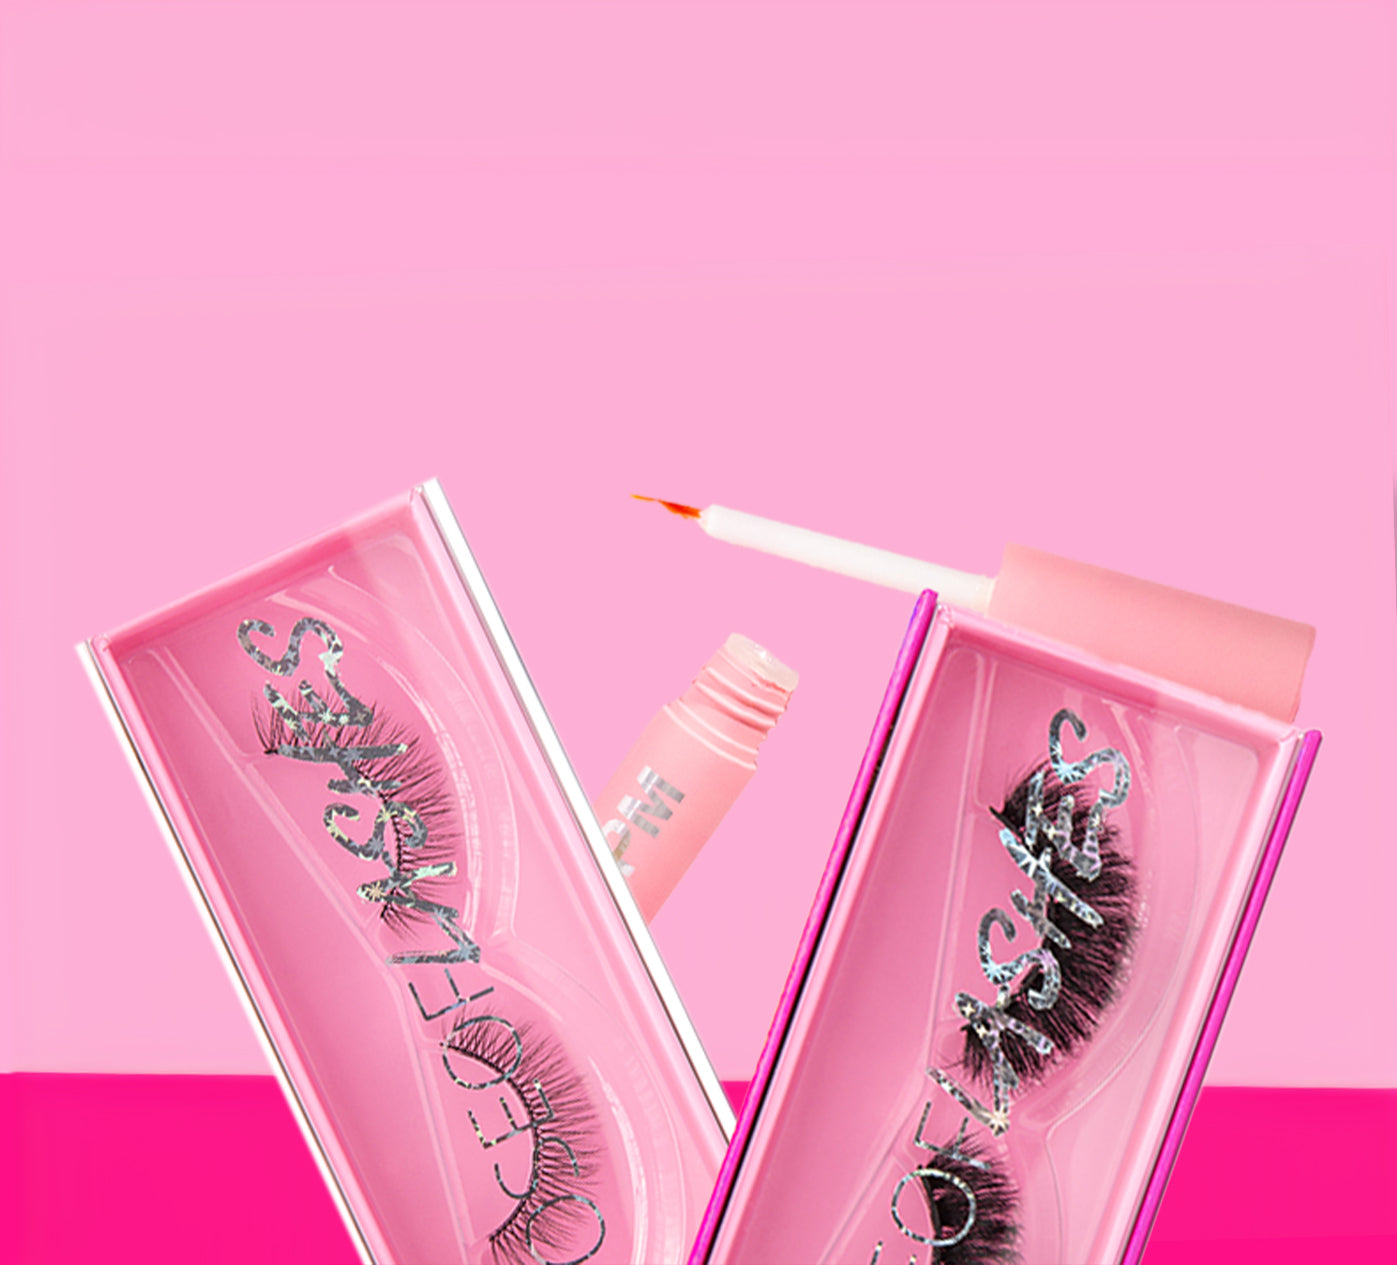 False eyelashes in pink packaging on a pink background.